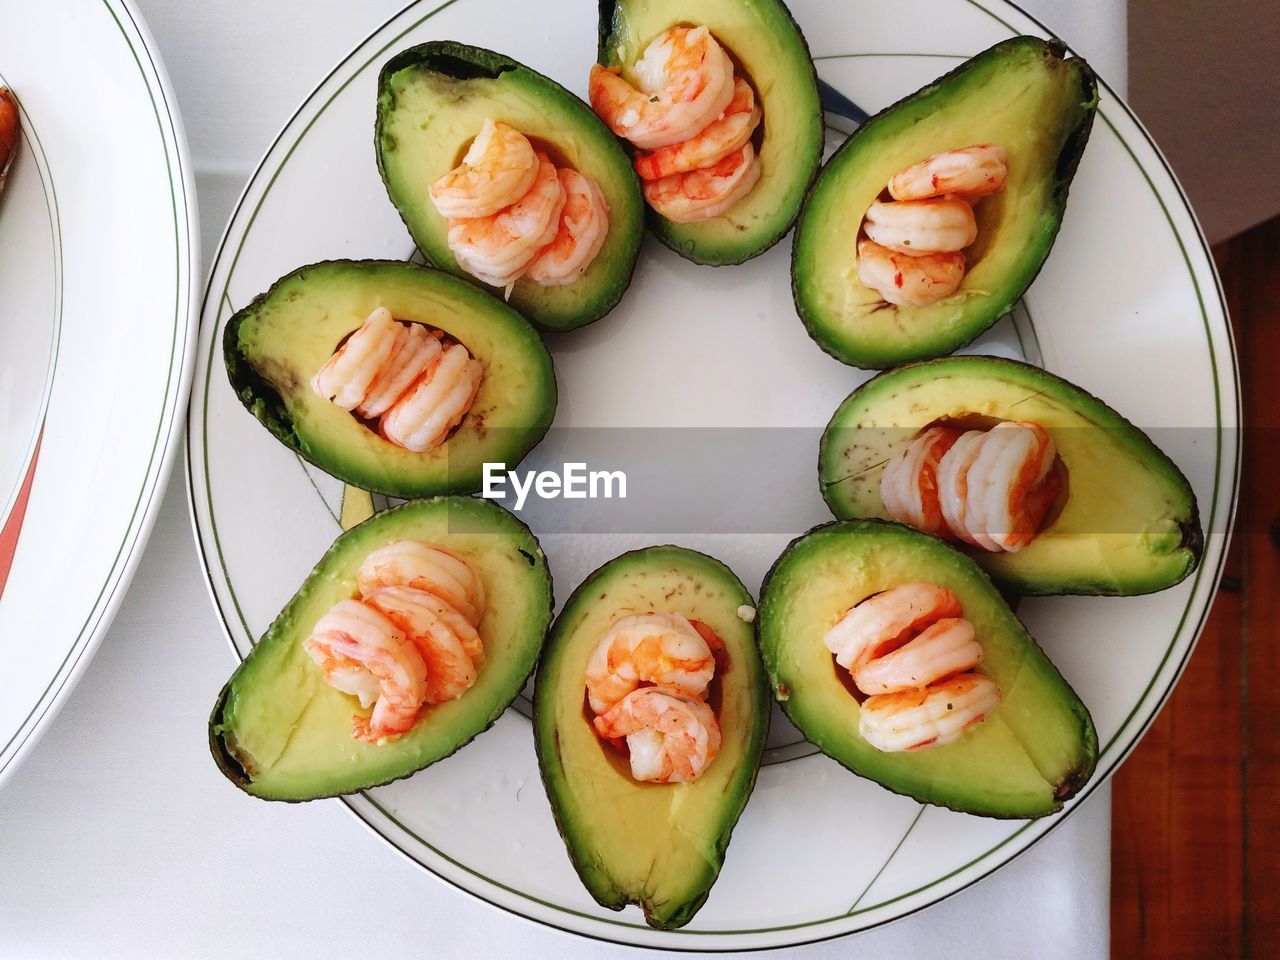 Close-up of avocados with shrimp in plate